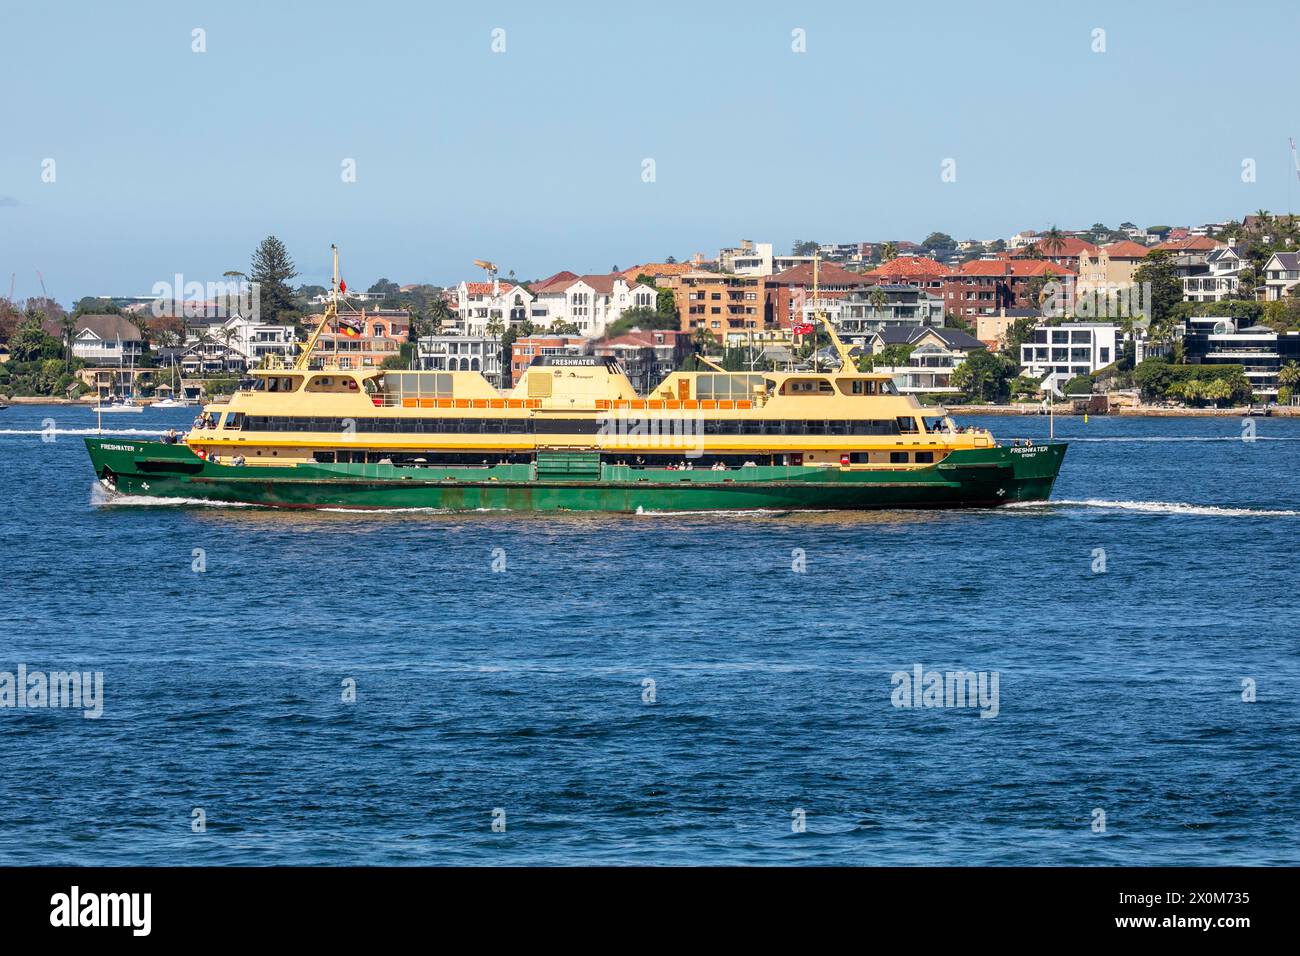 Sydney,Australia, the Manly ferry MV Freshwater vessel travels between Circular Quay and Manly Beach ferry wharf on Sydney Harbour,NSW,Australia Stock Photo